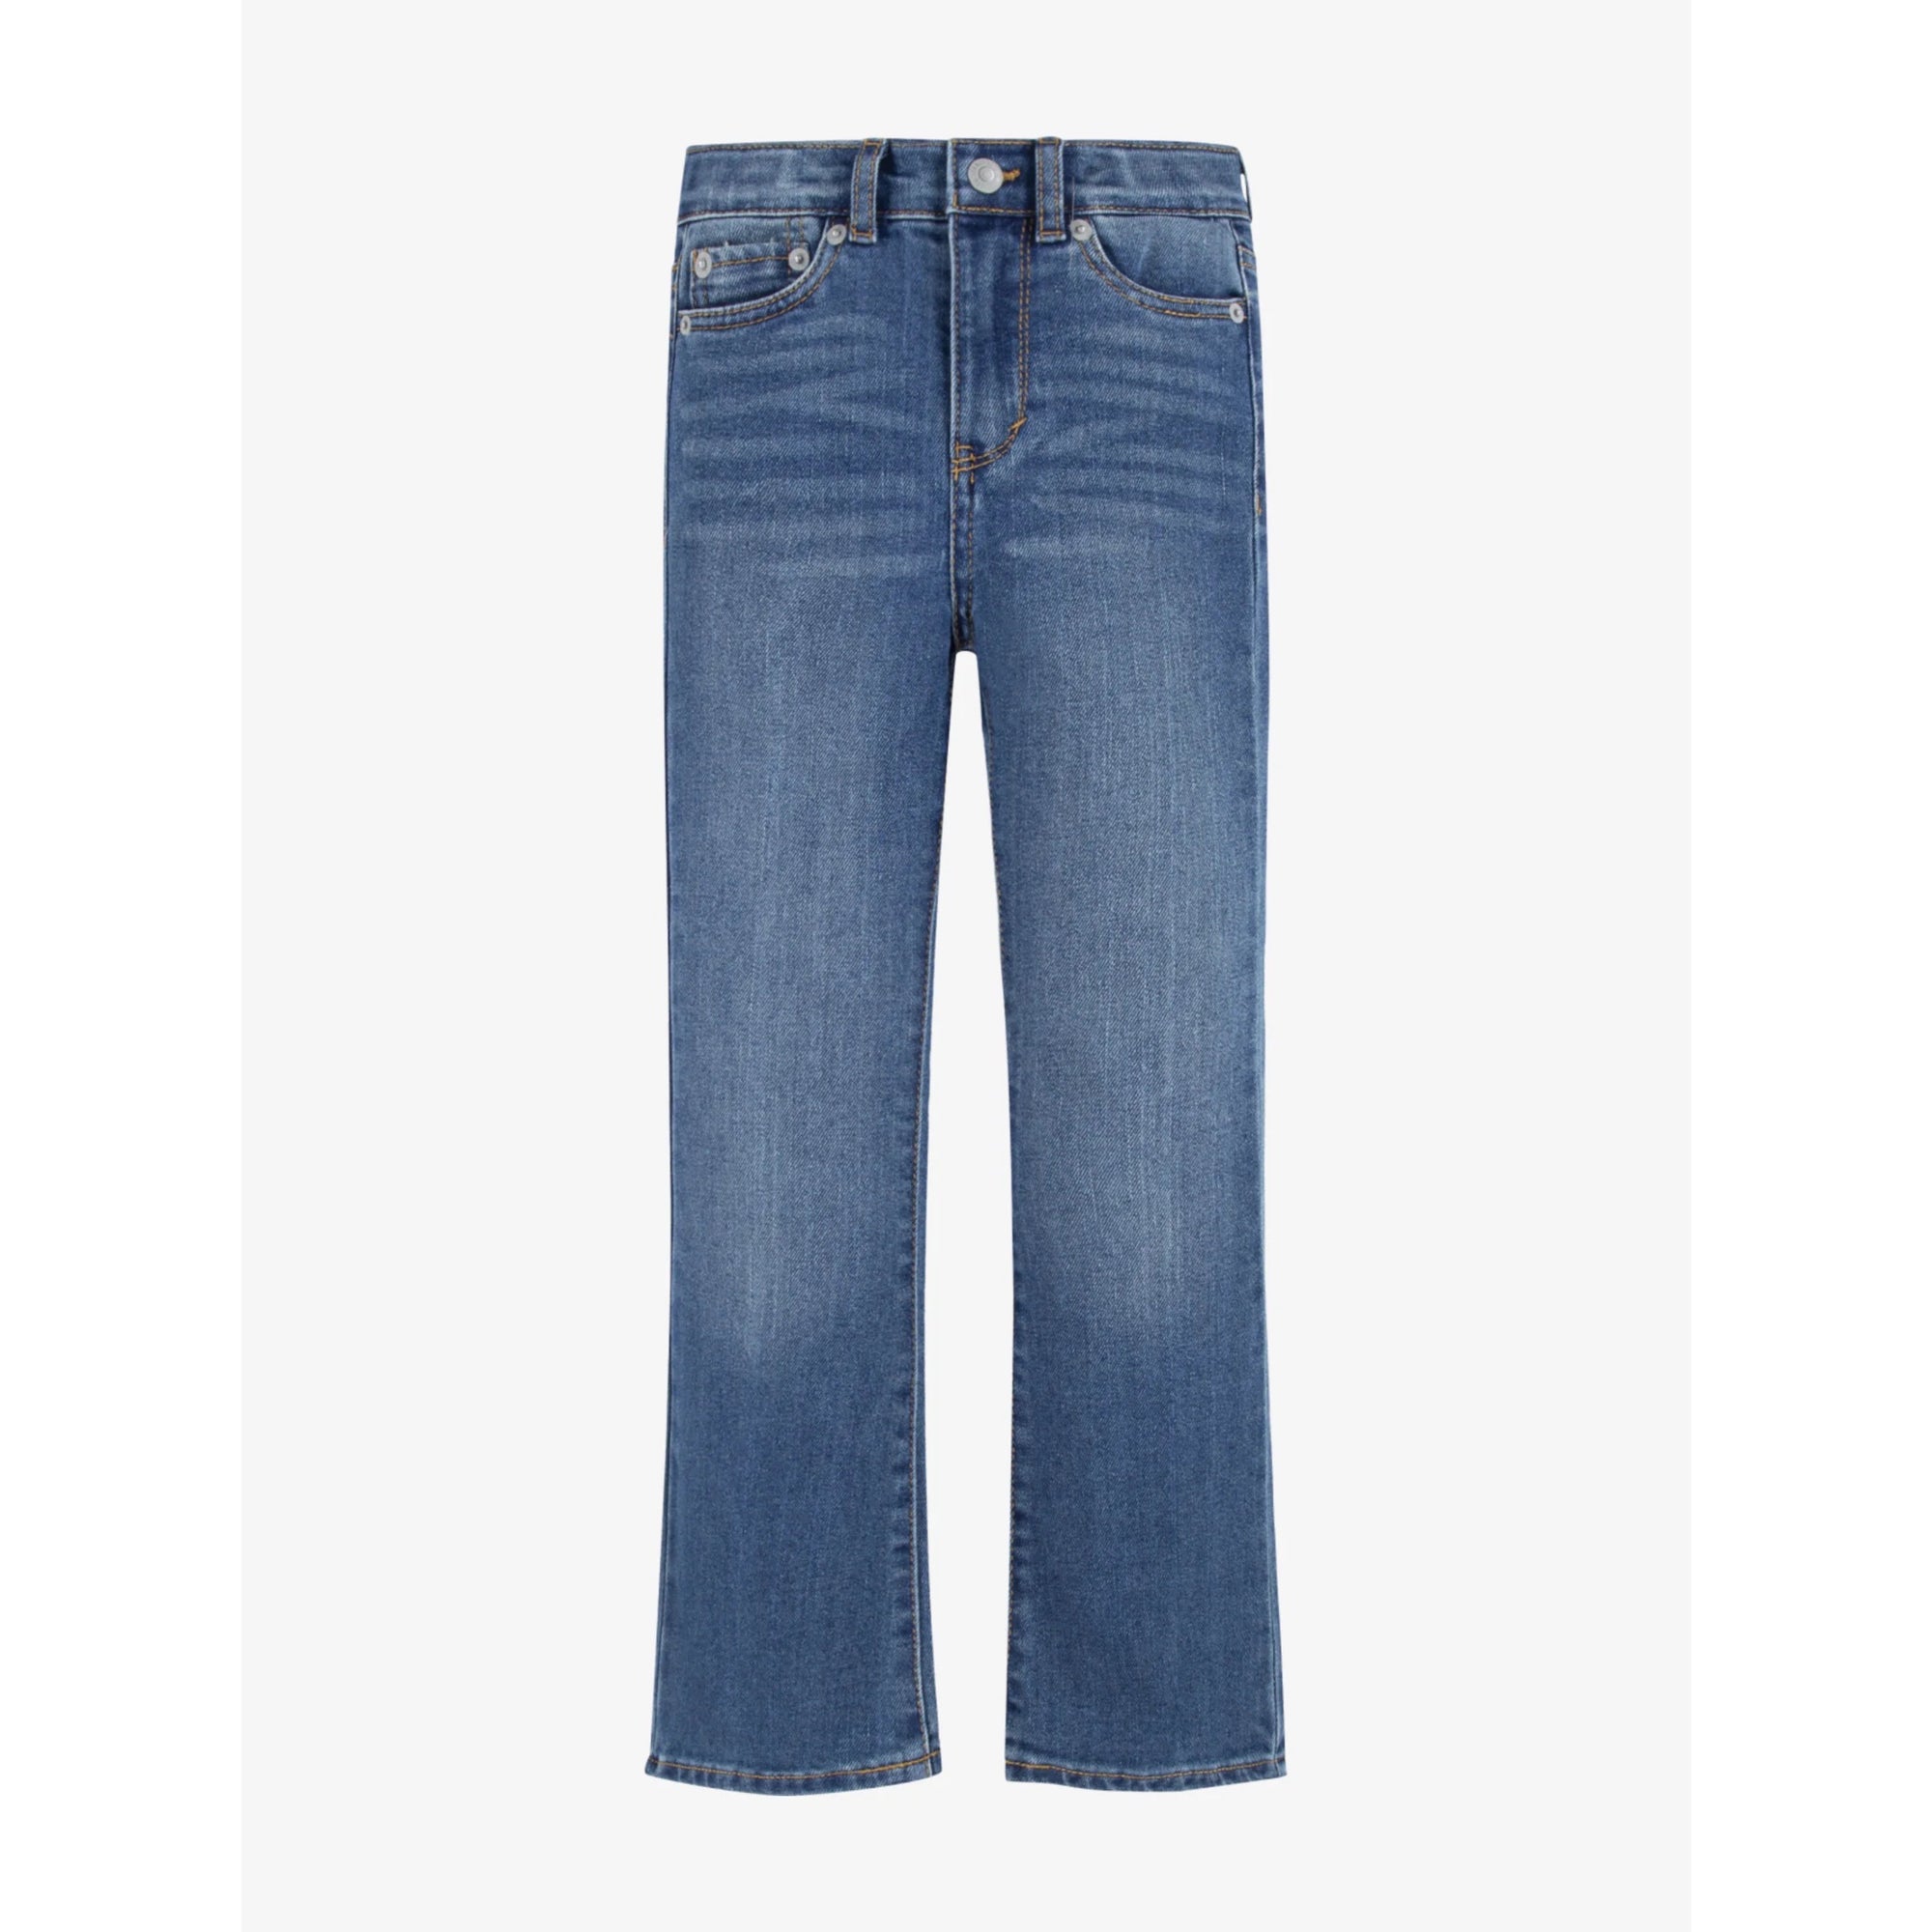 Levis Girls 726 Flare Jeans 4Eg970 Clothing 10YRS / Mid Denim,12YRS / Mid Denim,14YRS / Mid Denim